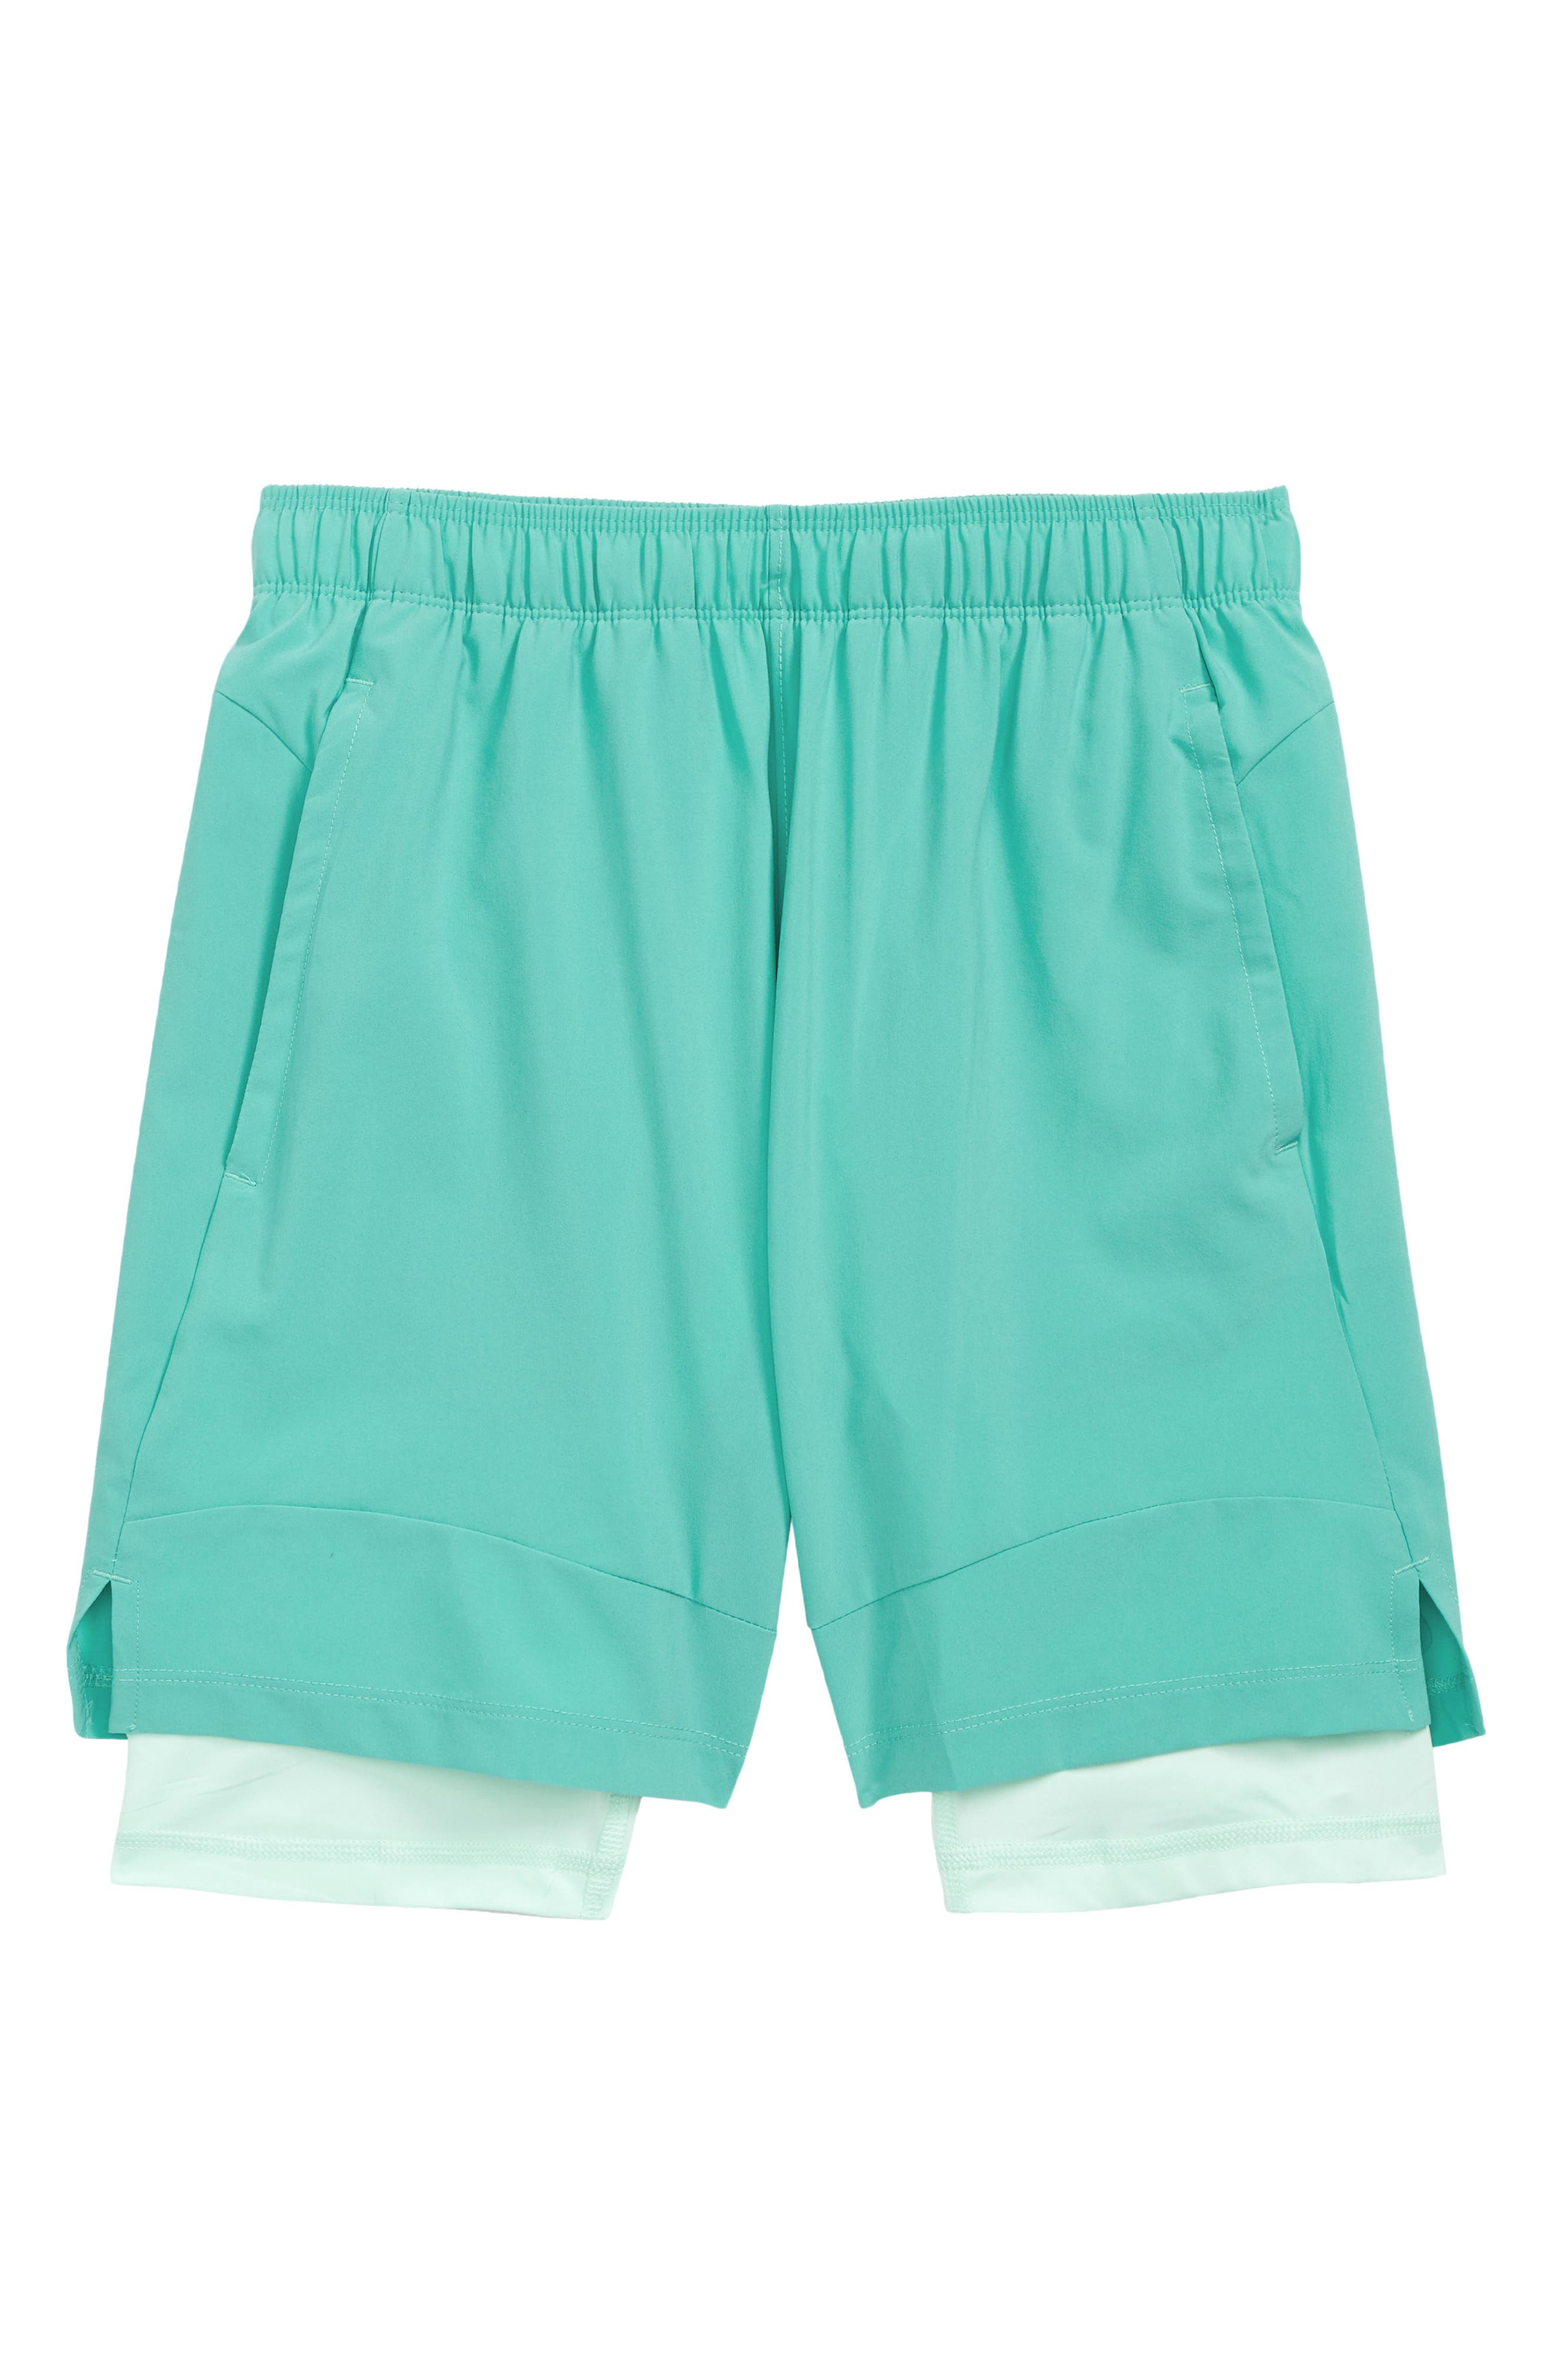 NIKE Kids' 2-in-1 Training Shorts in Washed Teal